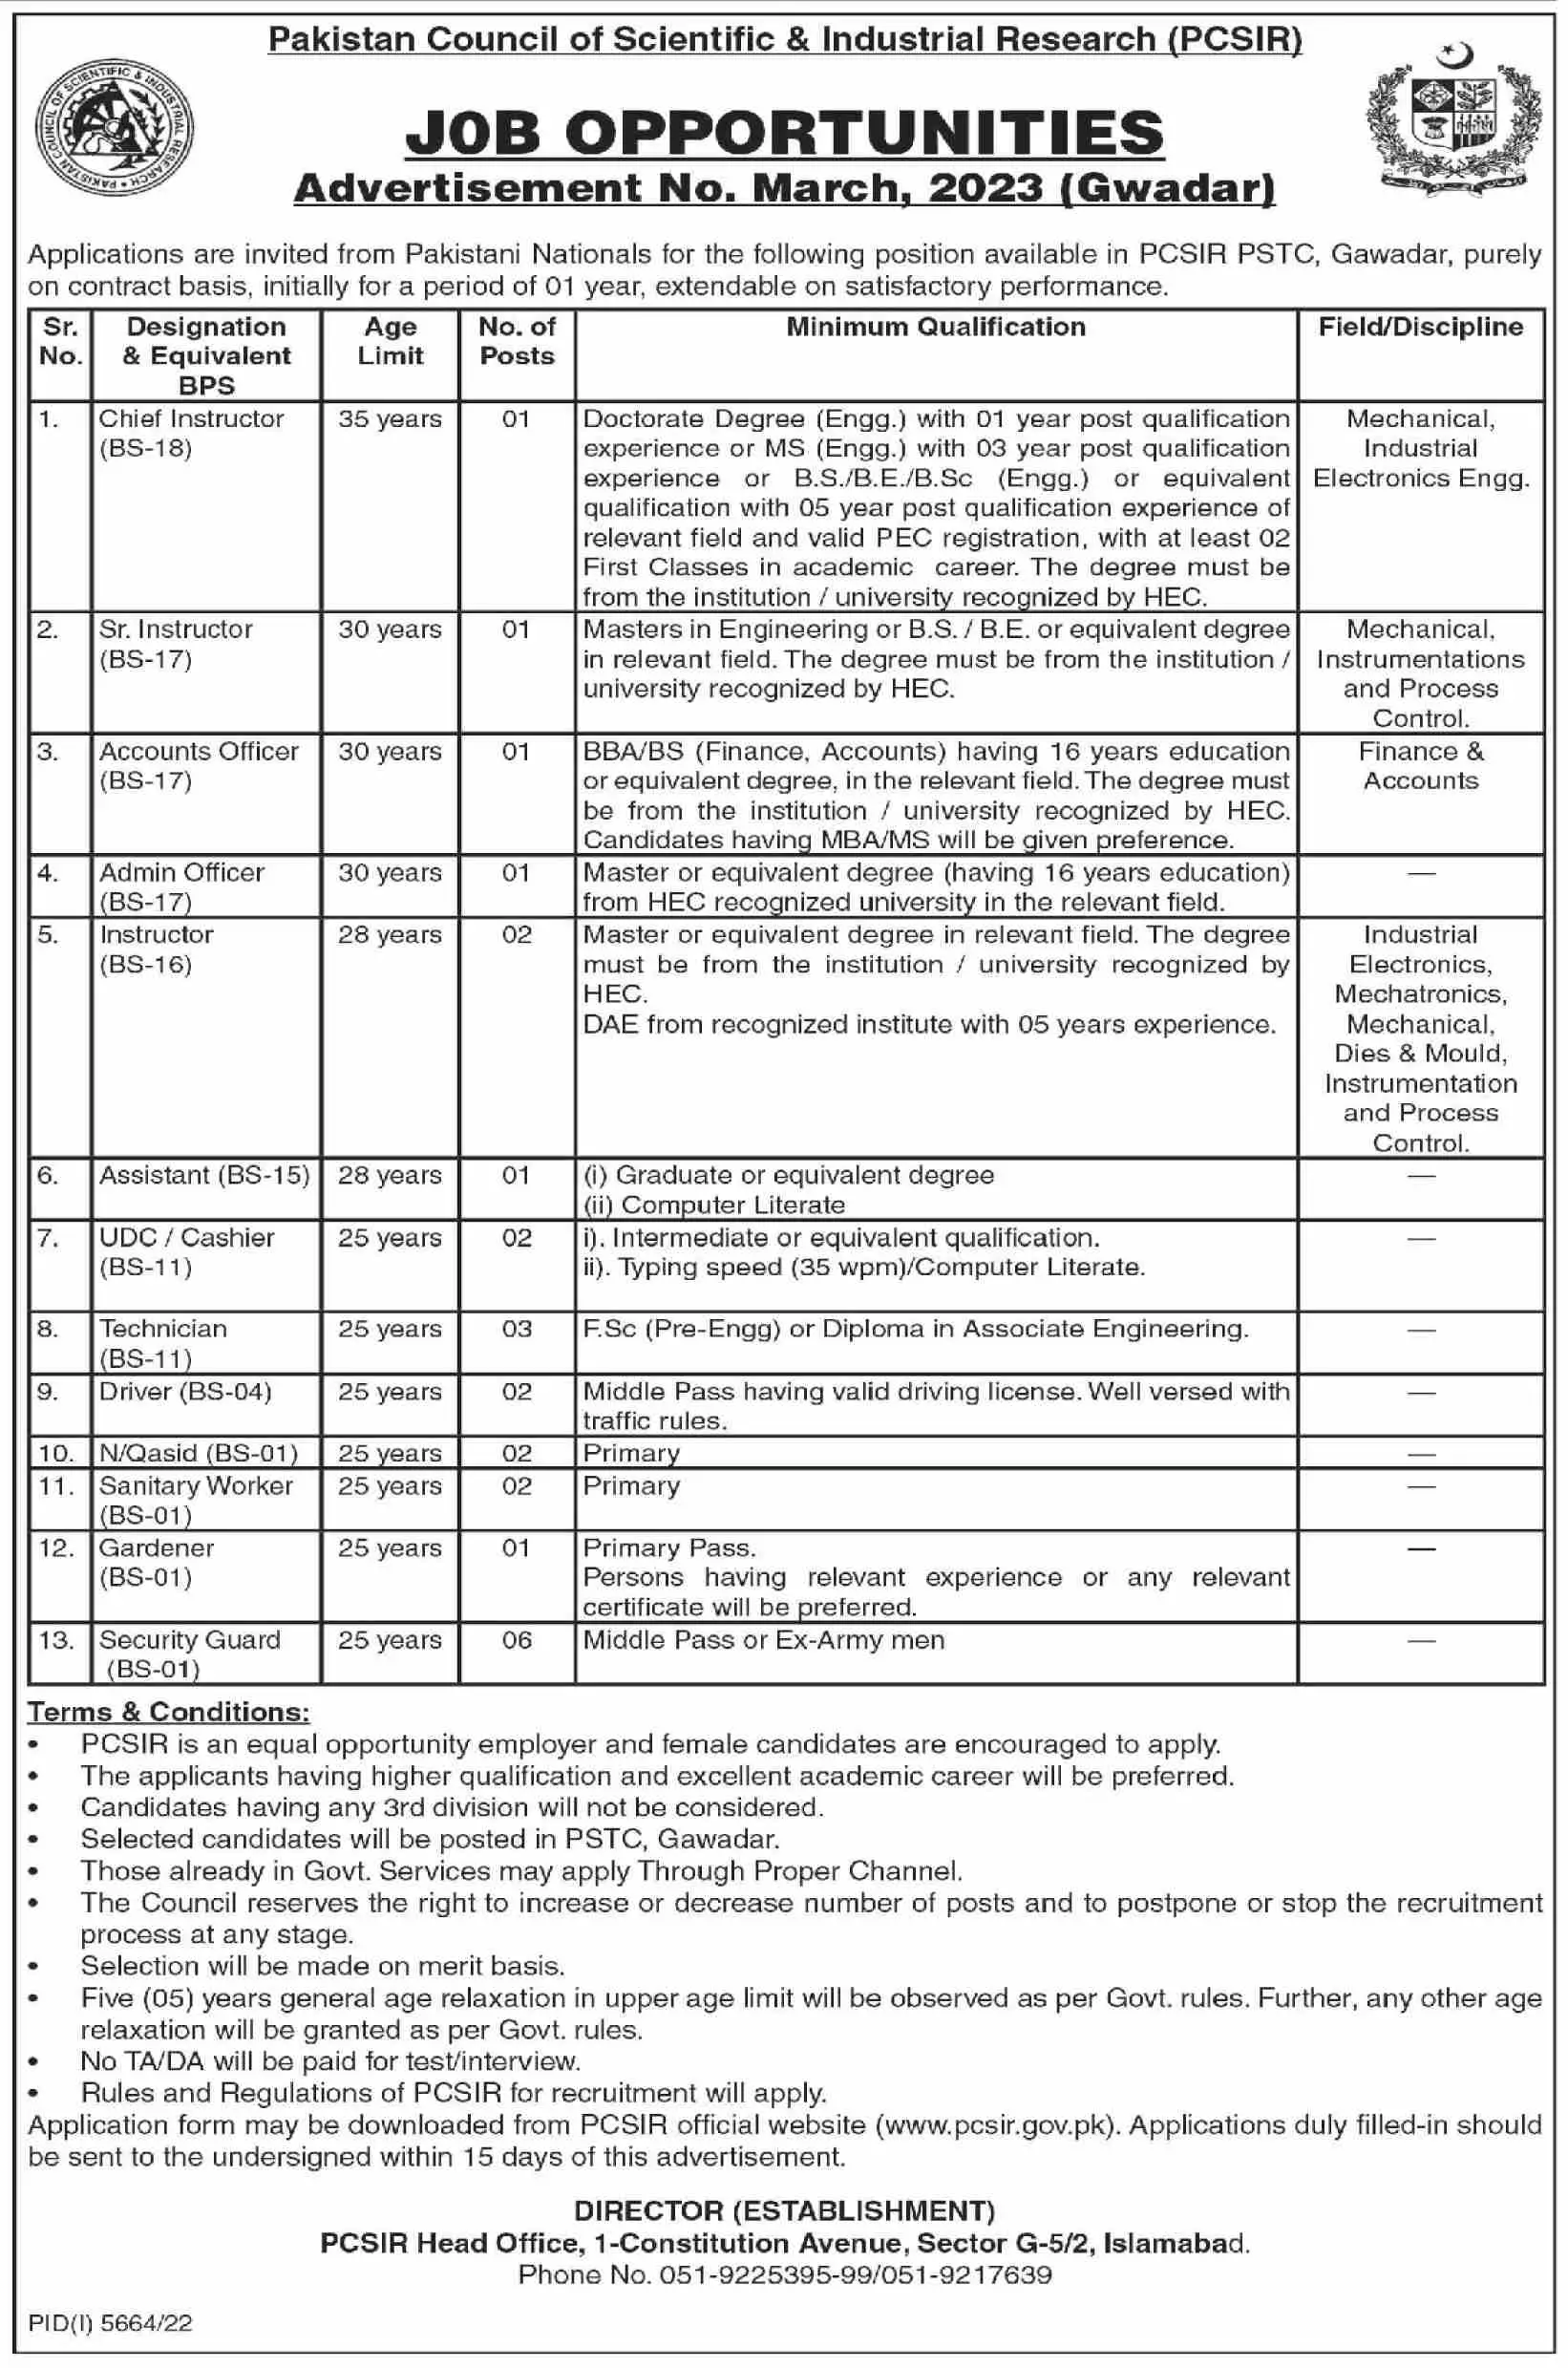 Pakistan Council Of Scientific And Industrial Research Jobs